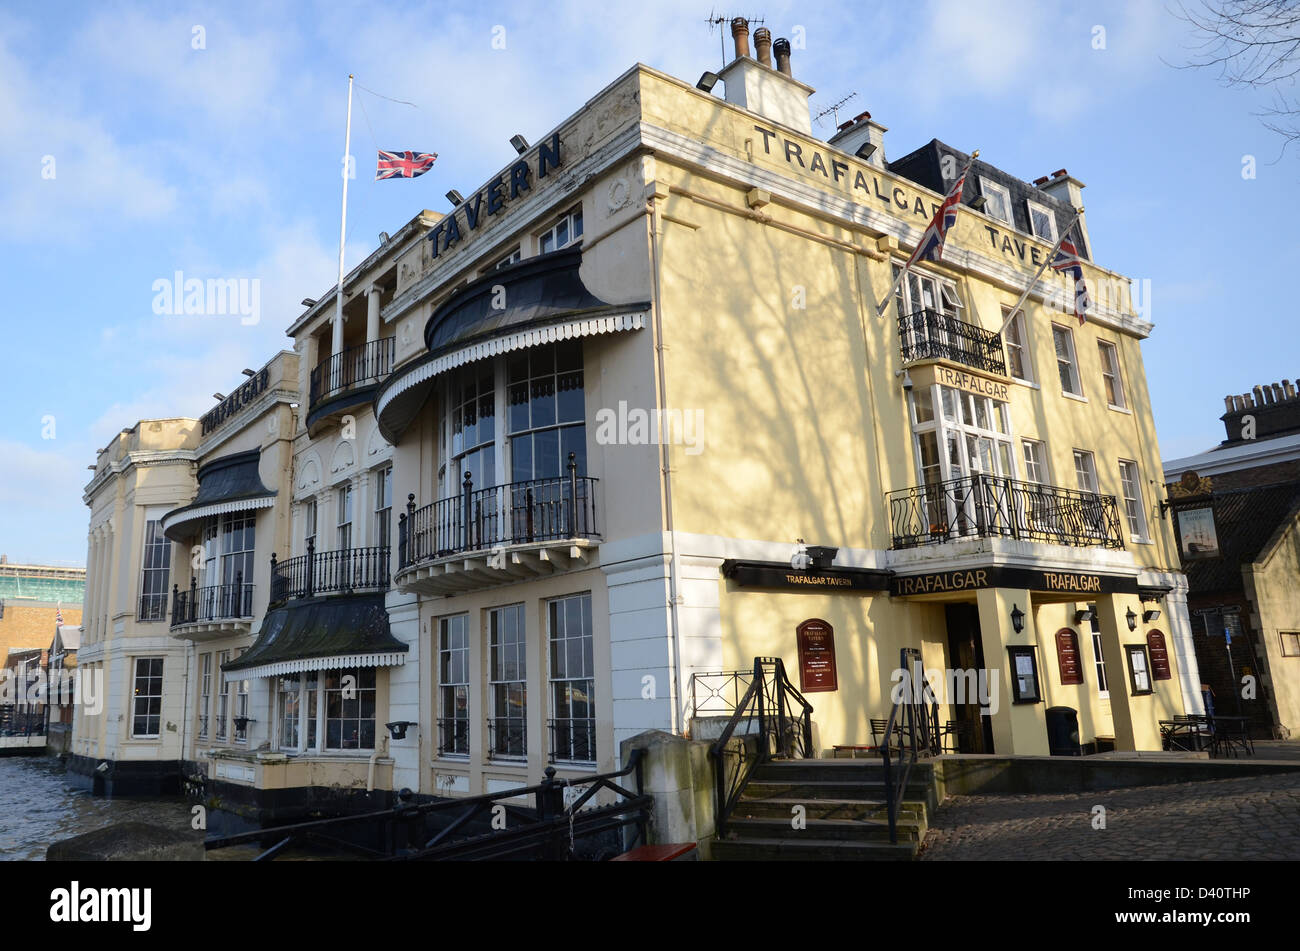 The Trafalgar Tavern public house on the River Thames in Greenwich Stock Photo